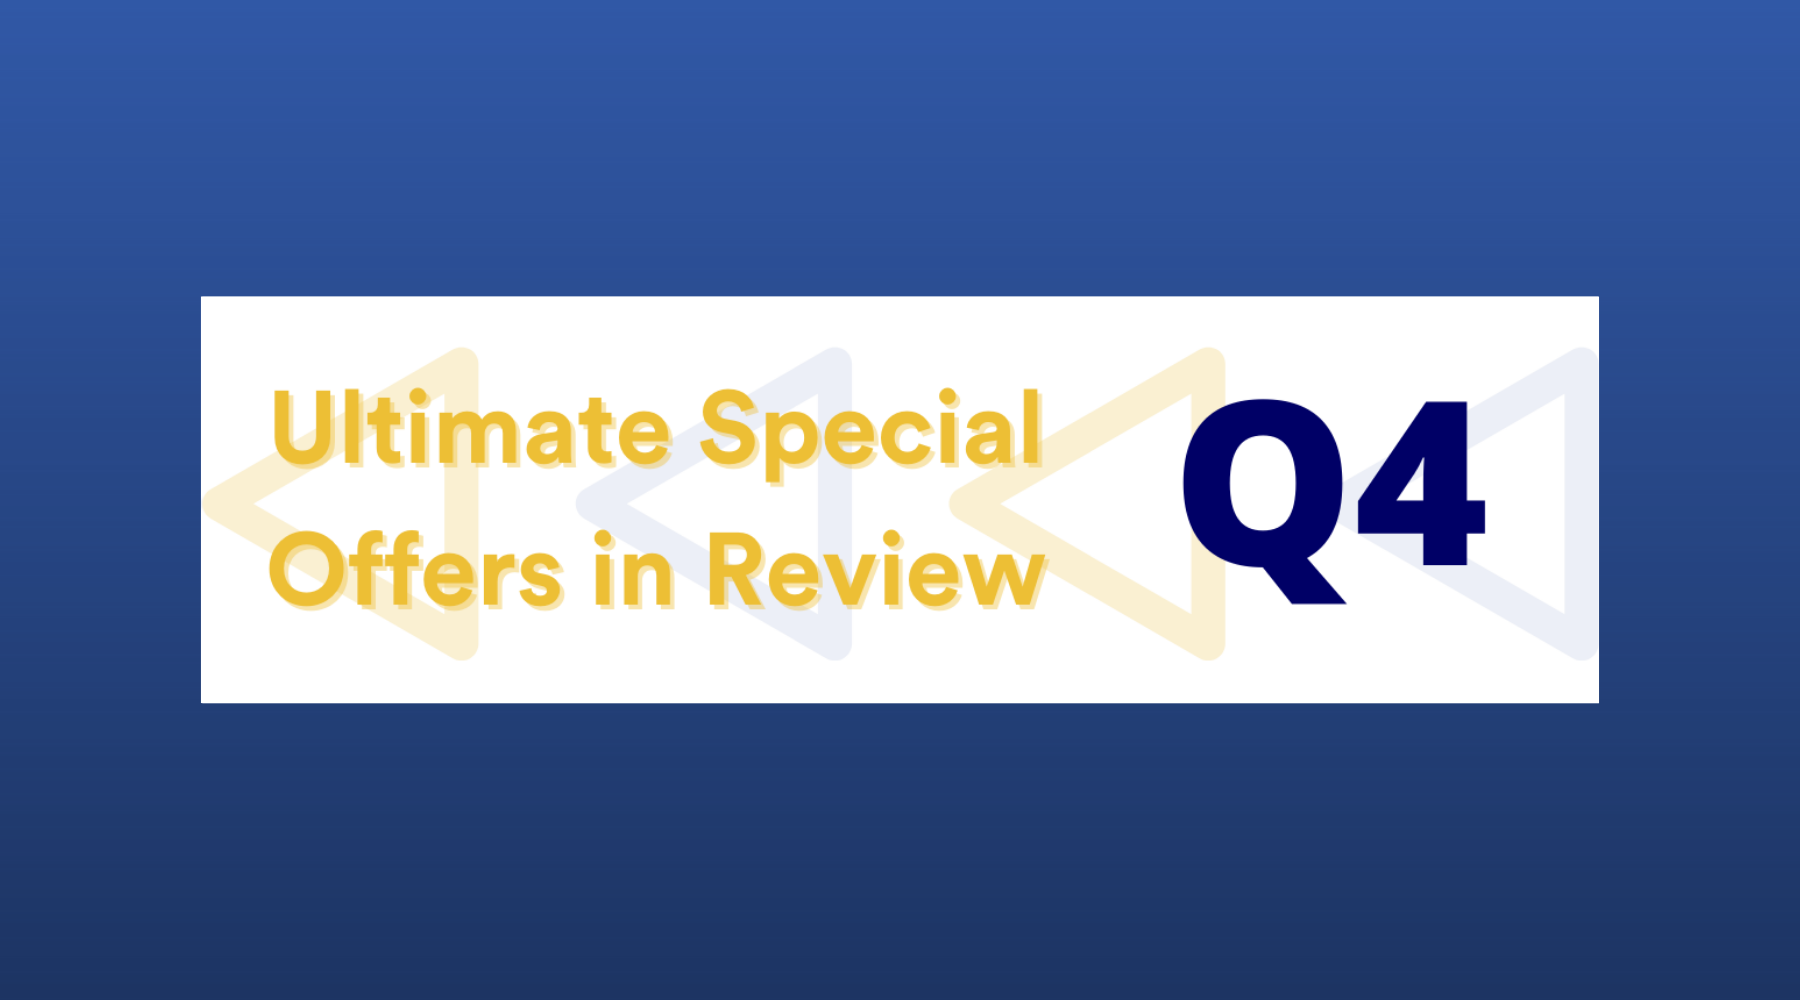 Ultimate Special Offers Q4 in Review